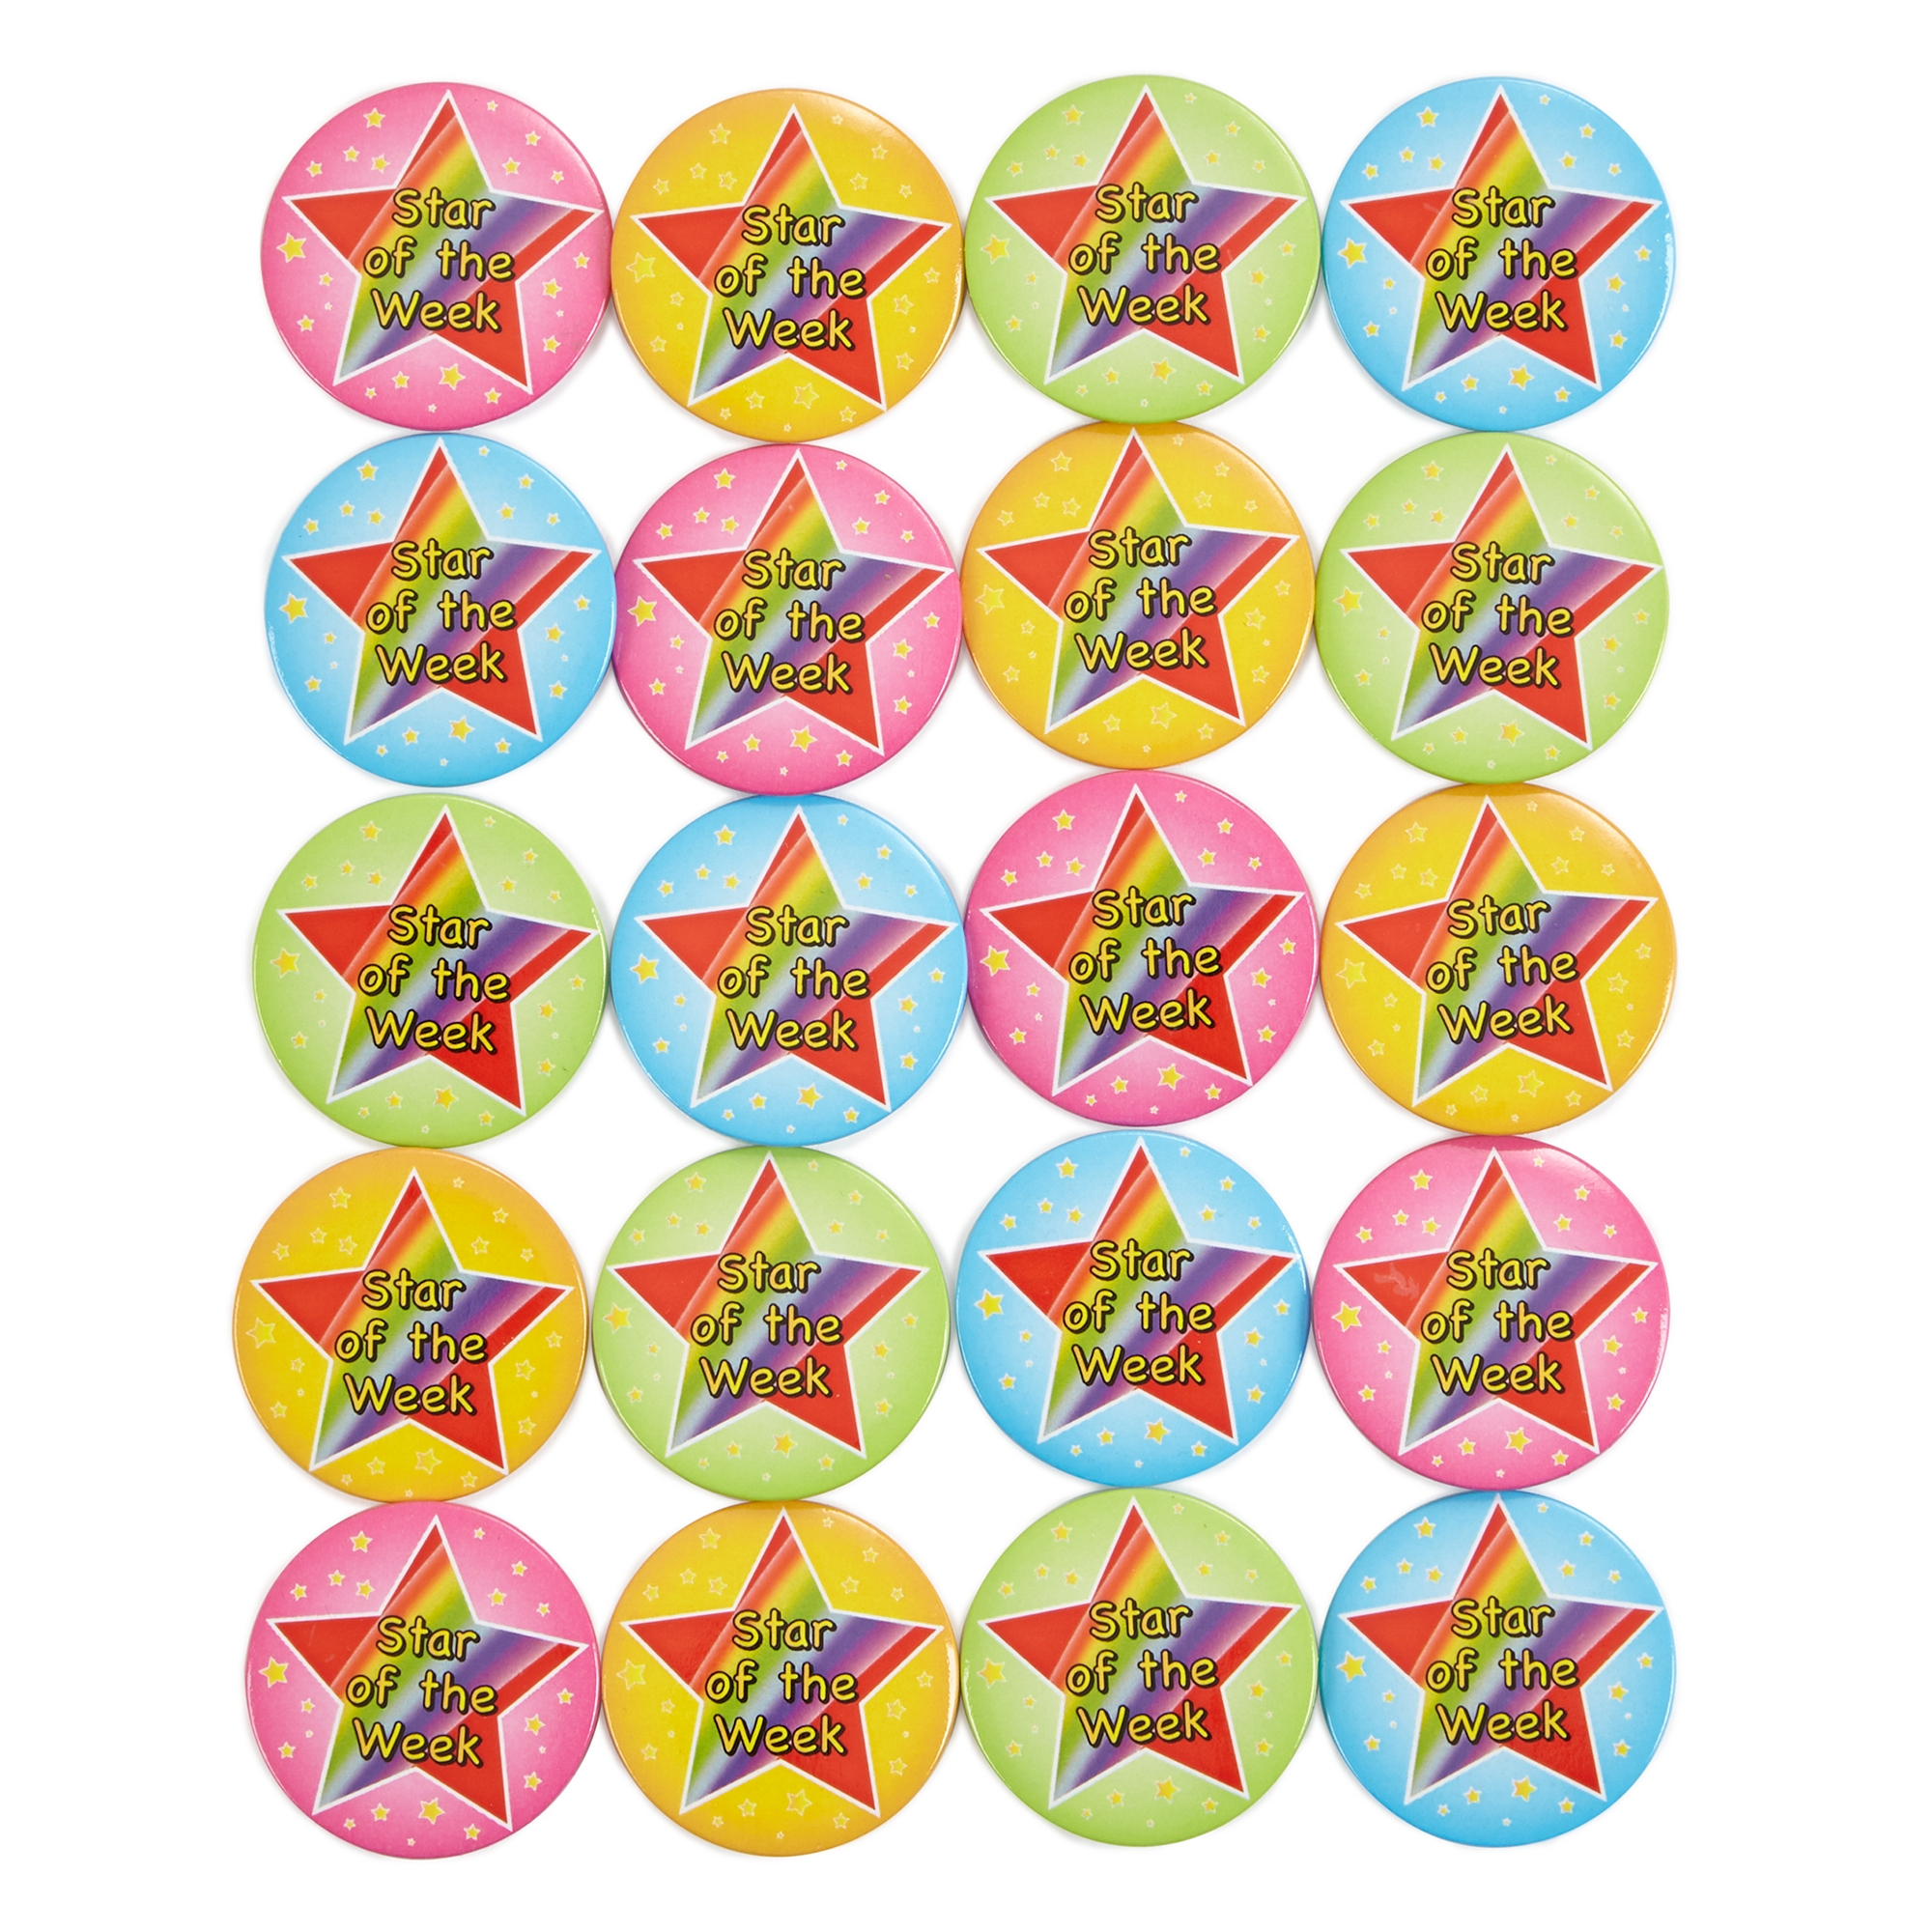 Star of the Week Badges - Pack of 20